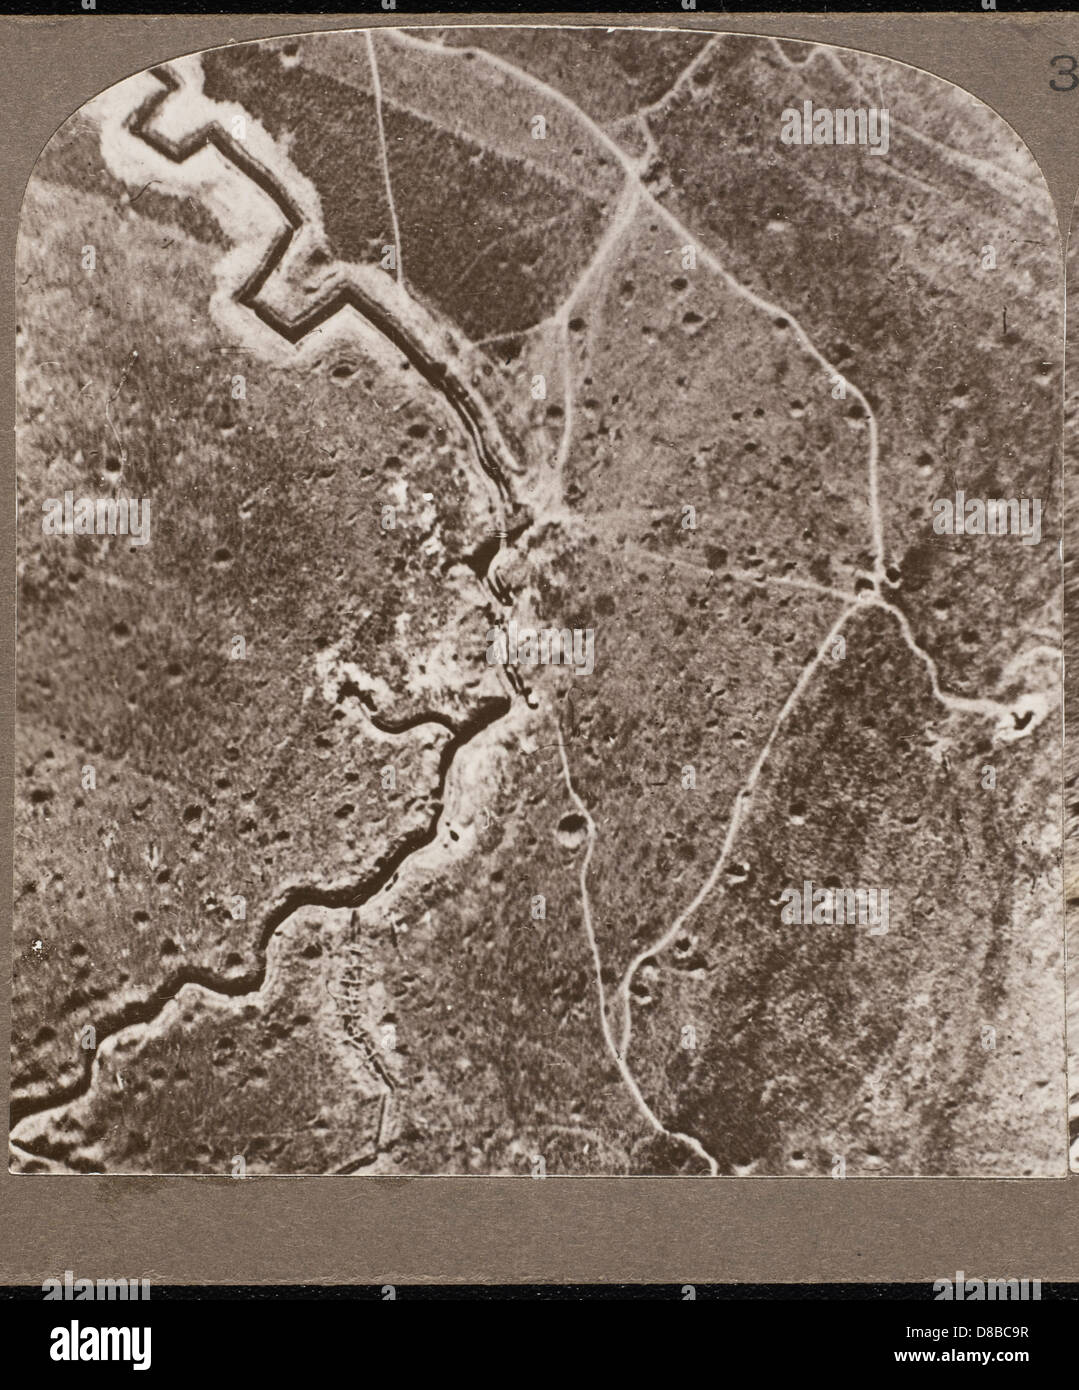 AERIAL VIEW OF TRENCHES Stock Photo